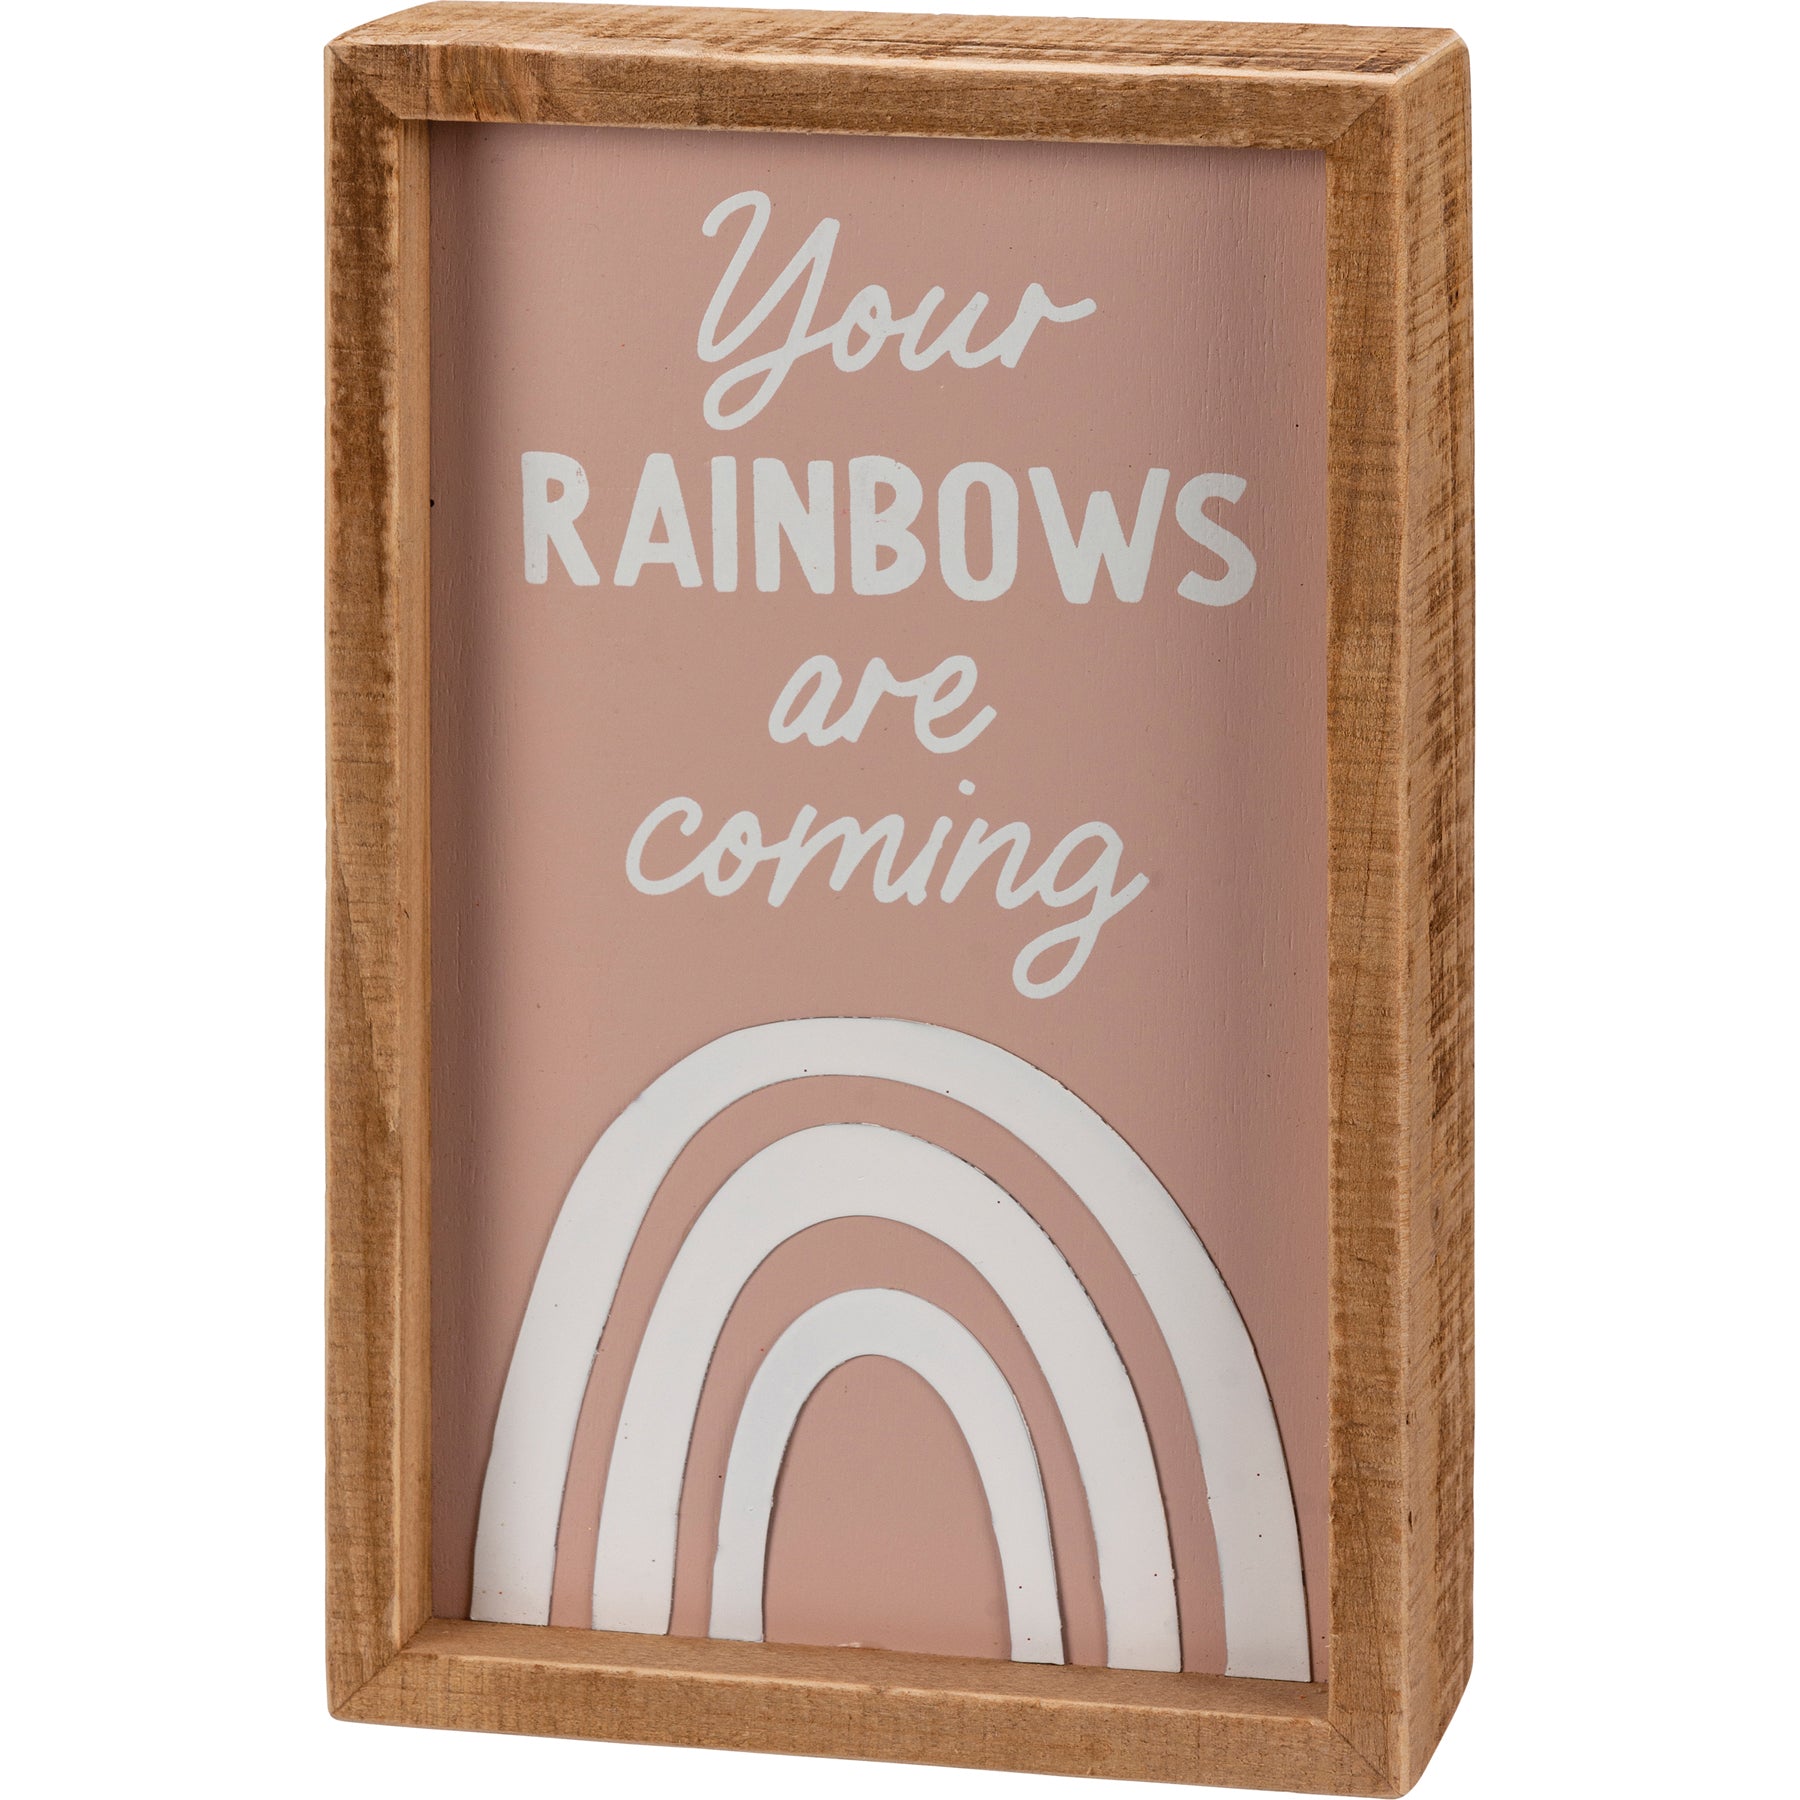 Your Rainbows Are Coming Wooden Box Sign 5" x 8"